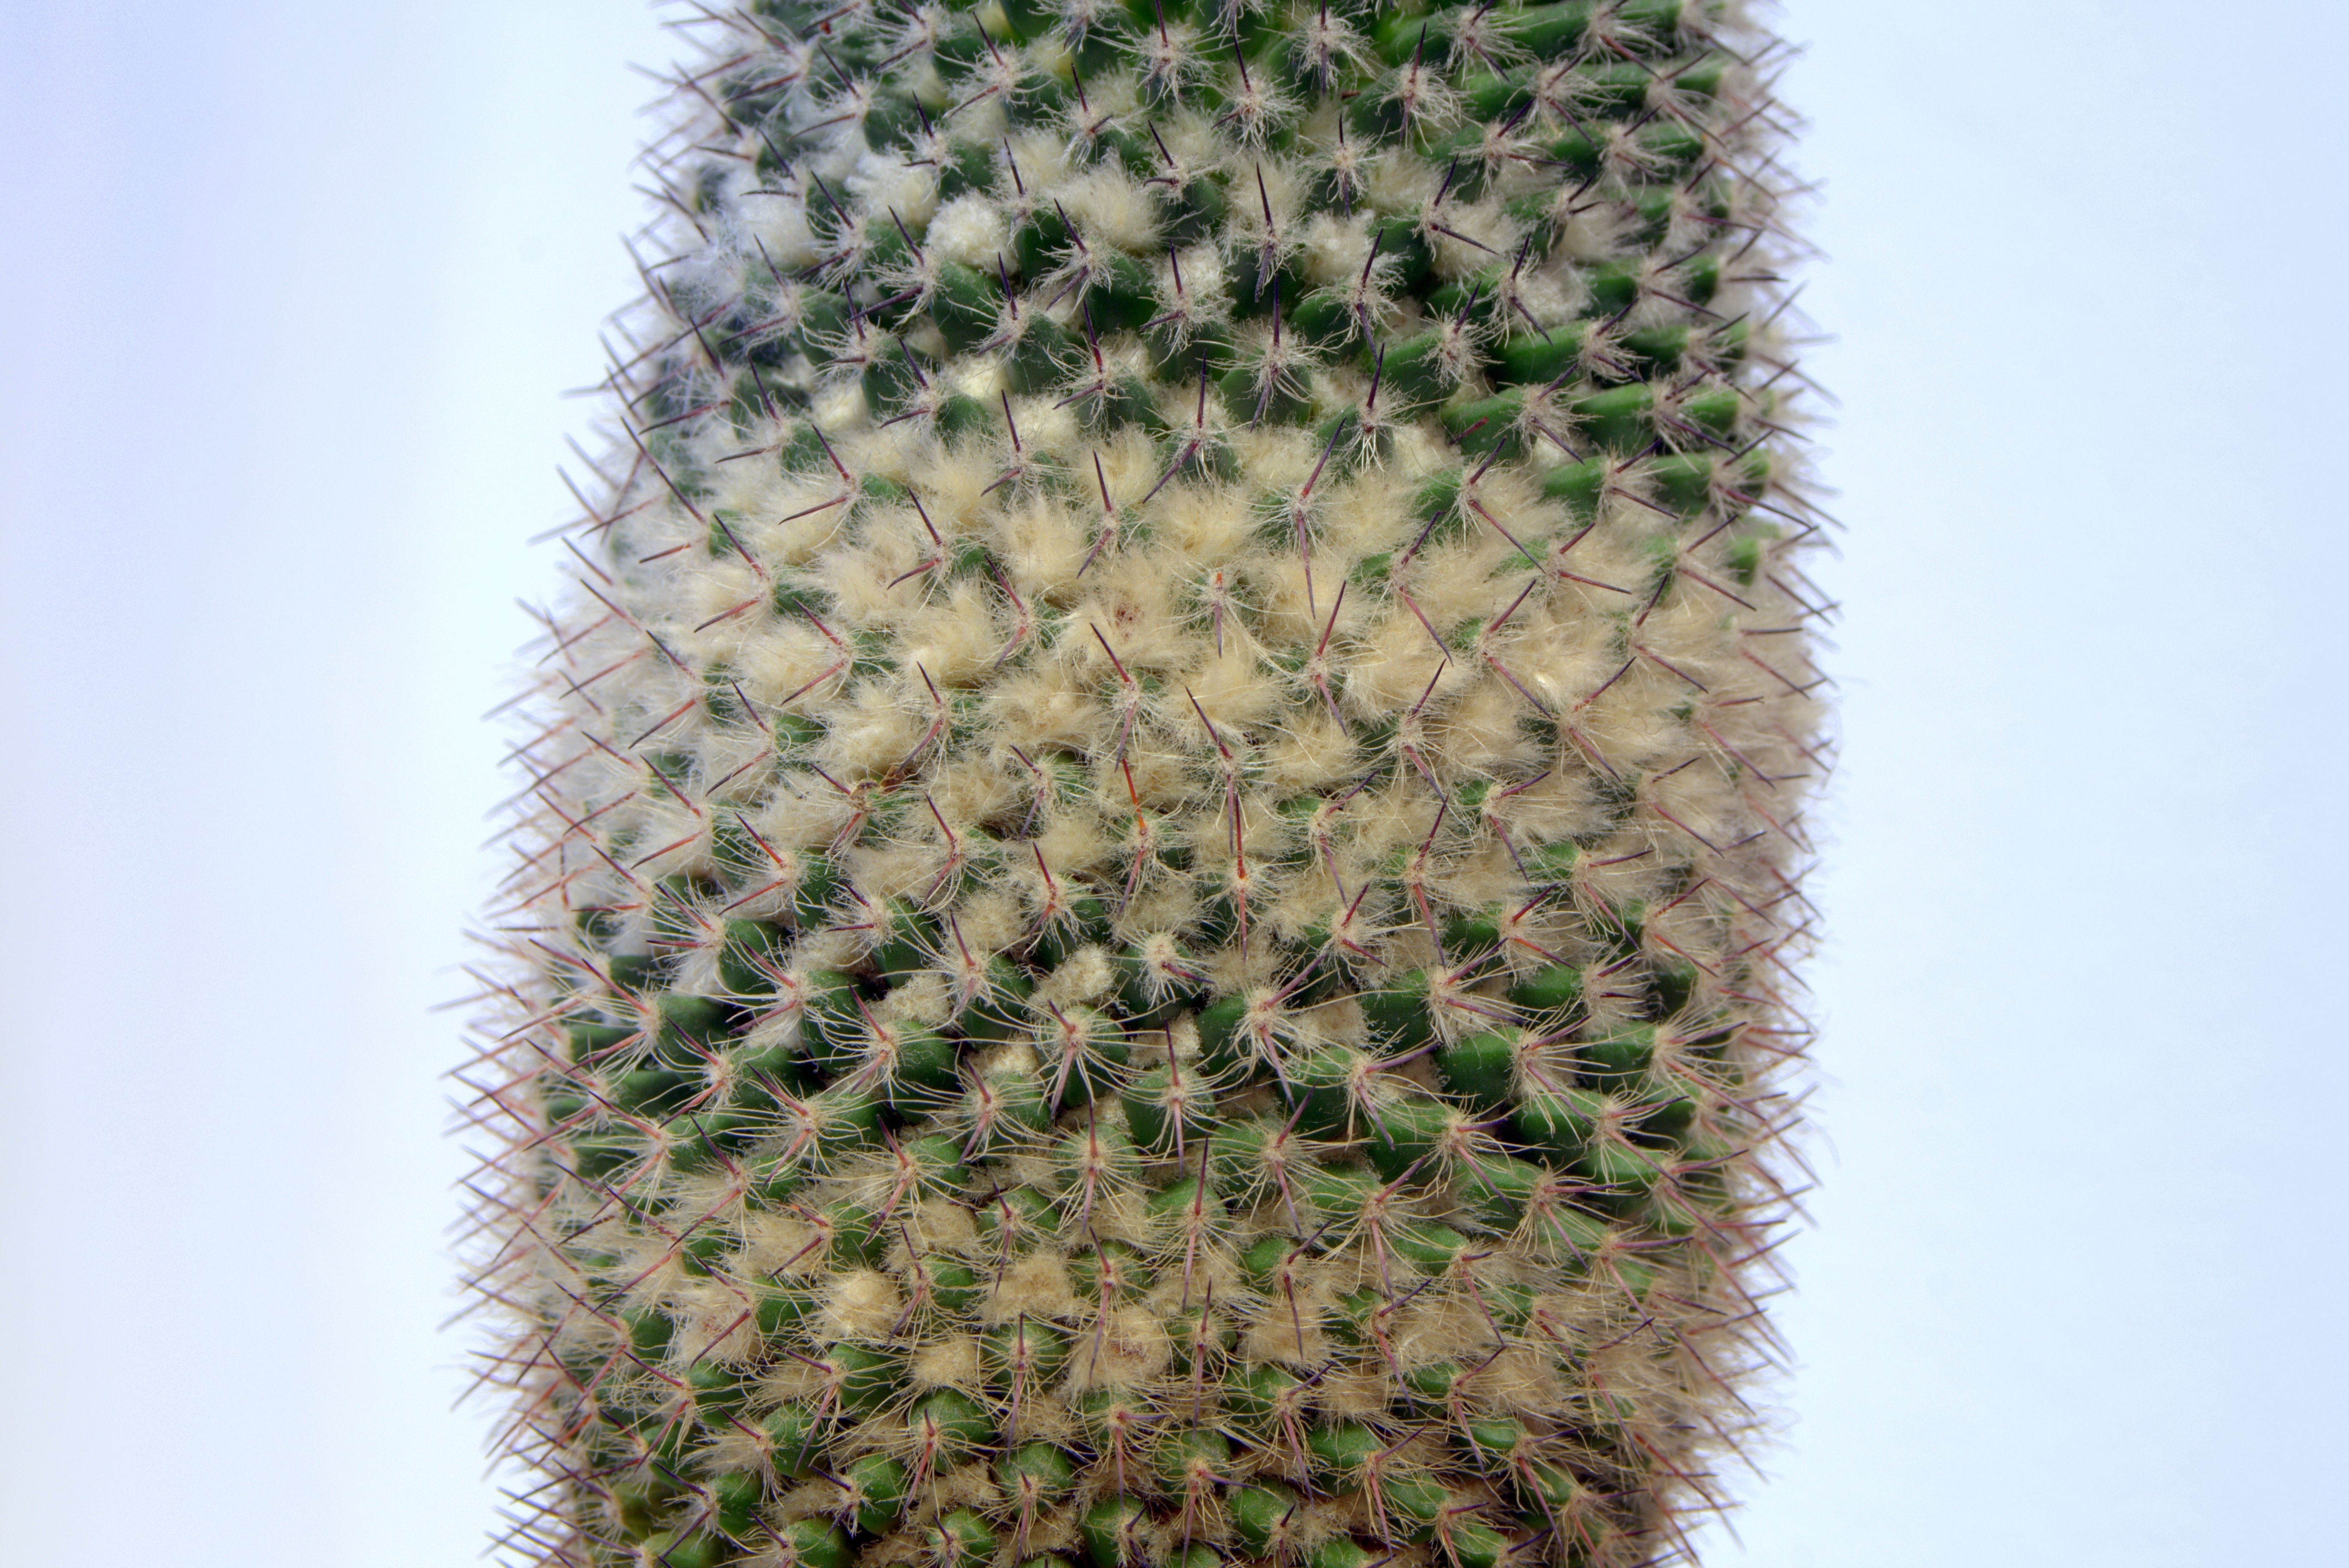 green and white cactus